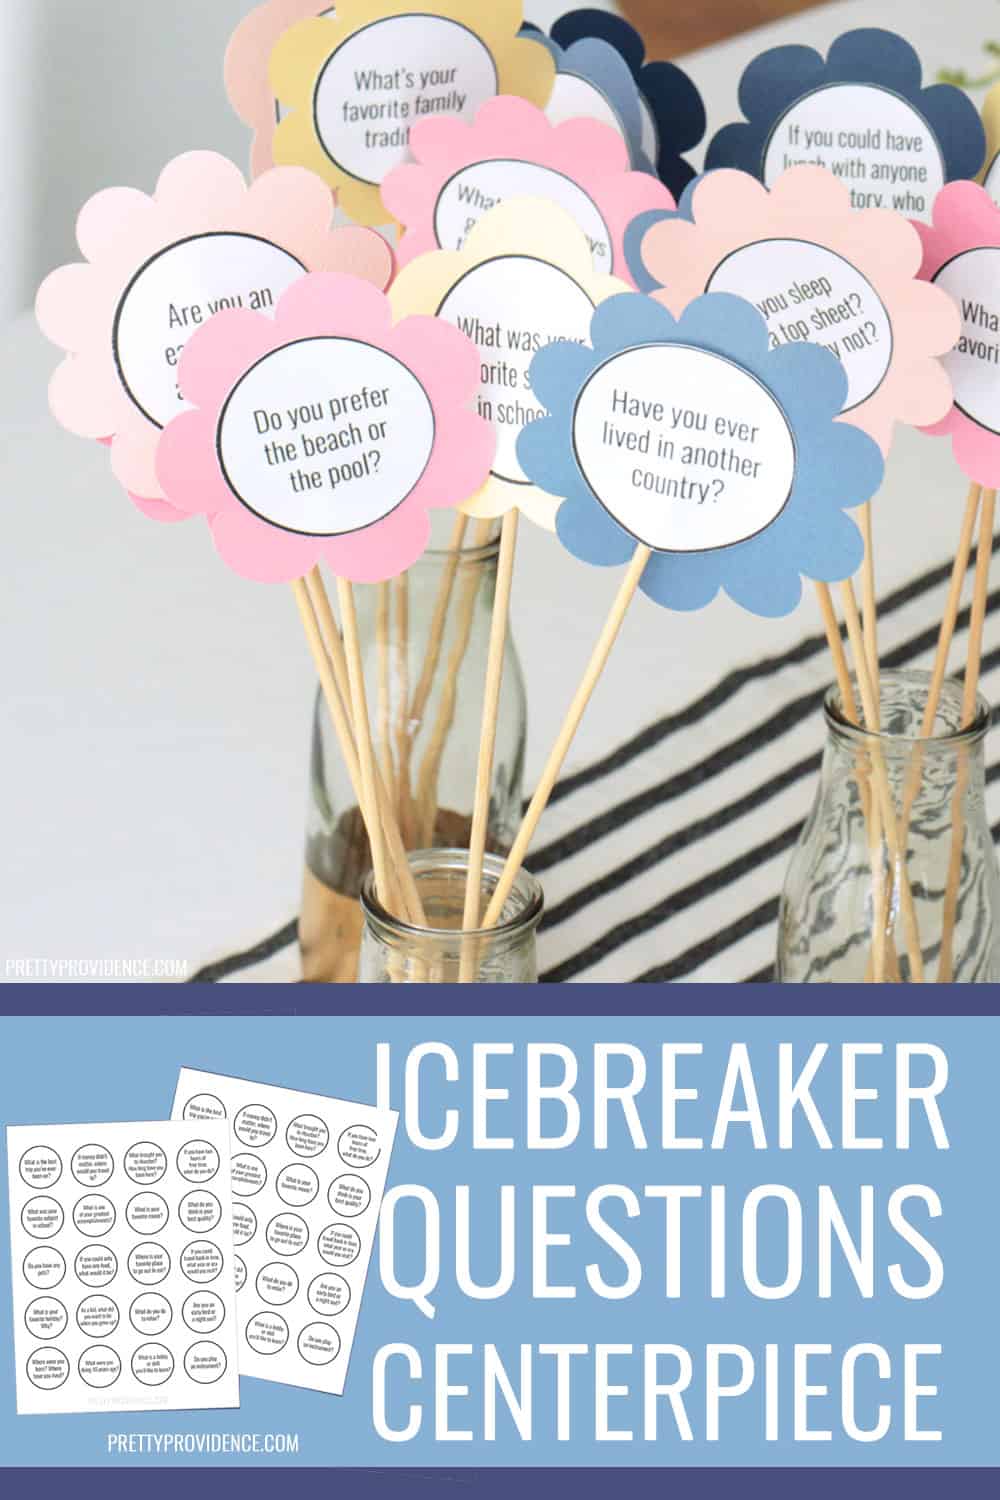 Getting To Know You Questions Centerpieces